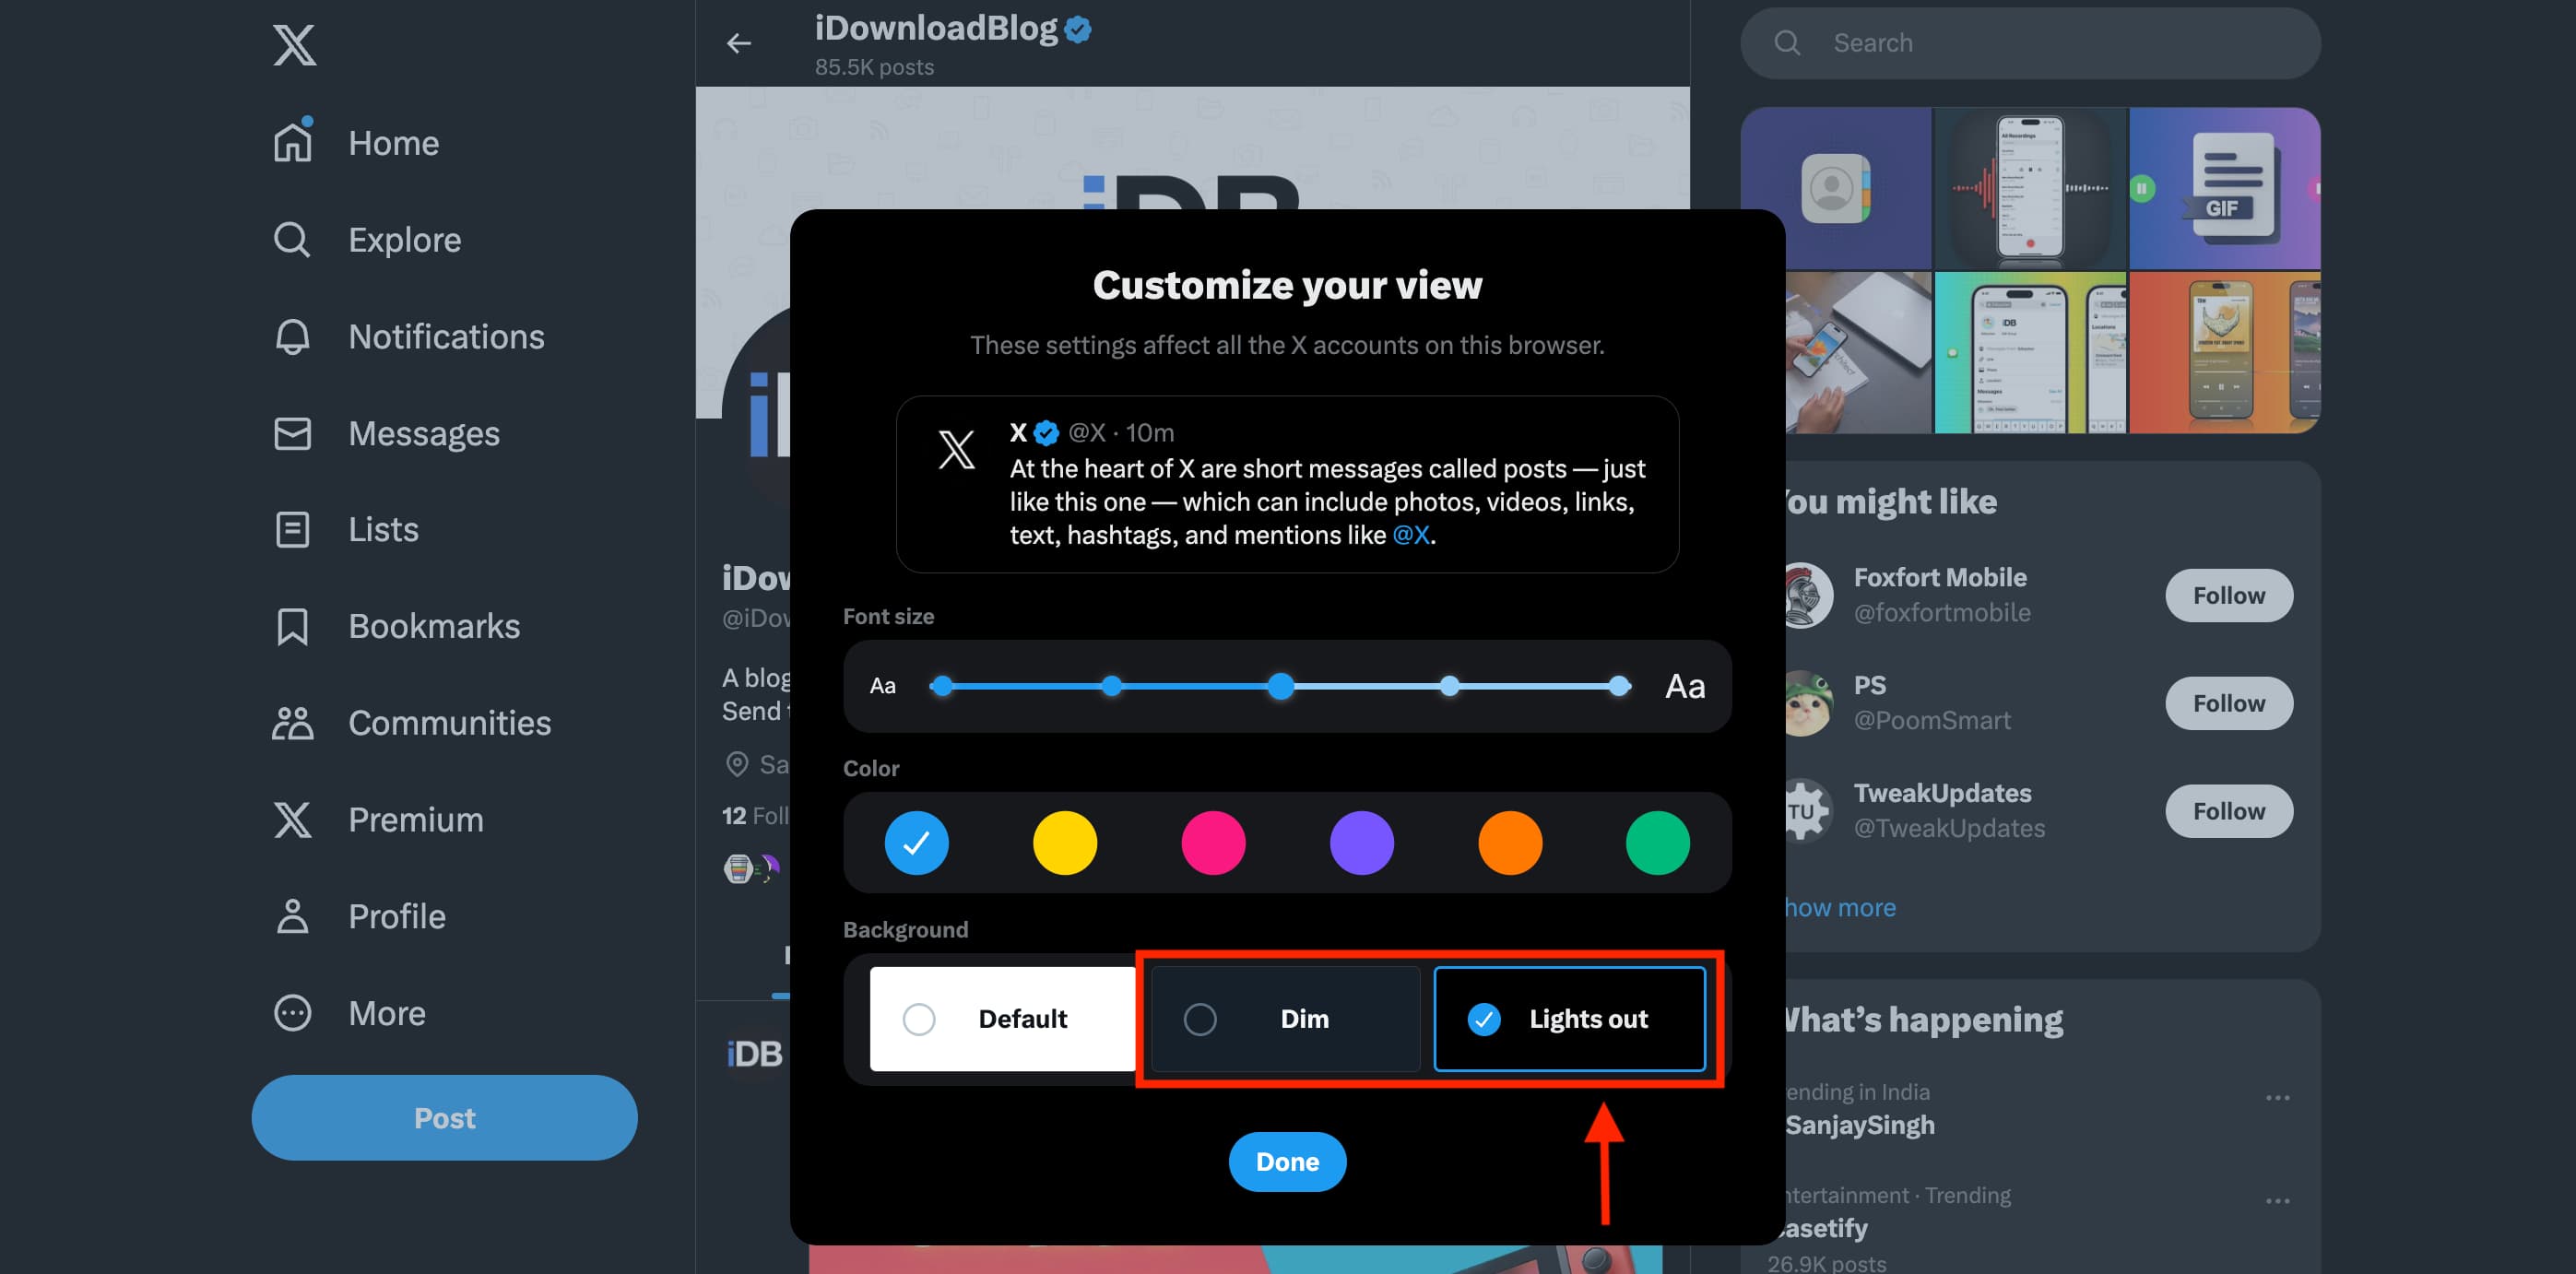 Lights out and Dim background settings for Twitter in Chrome web browser